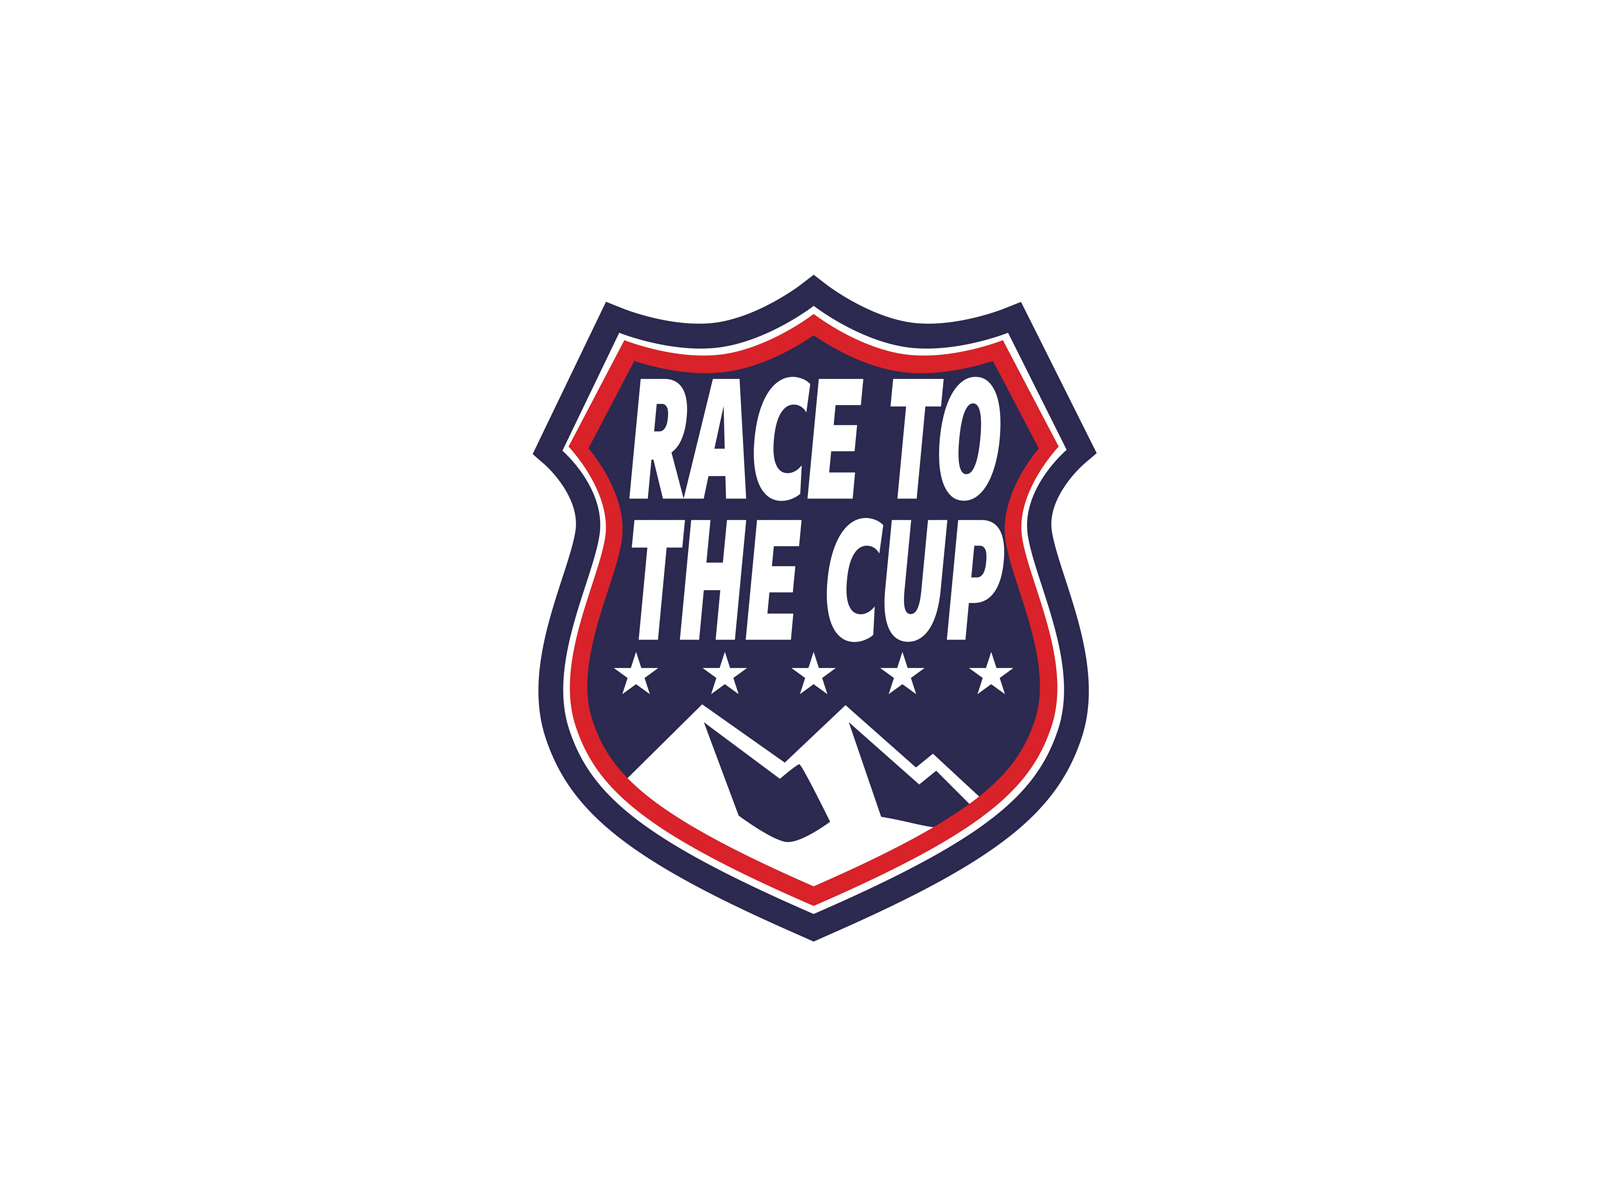 Race to the Cup Header